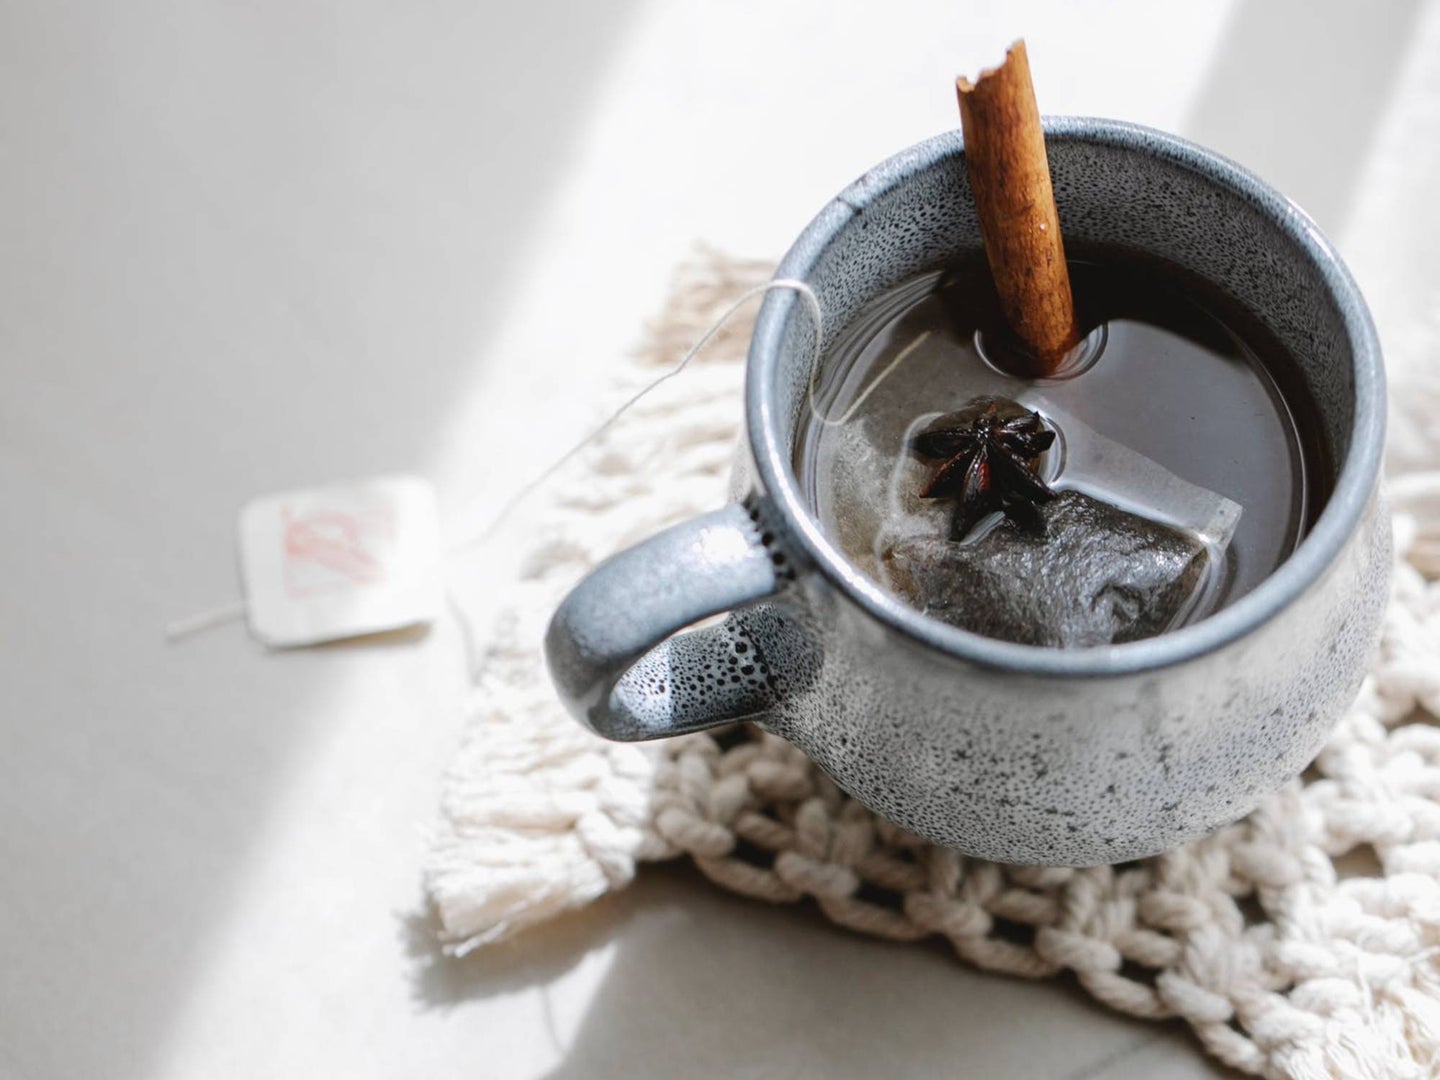 A cup of tea with a cinnamon stick in it